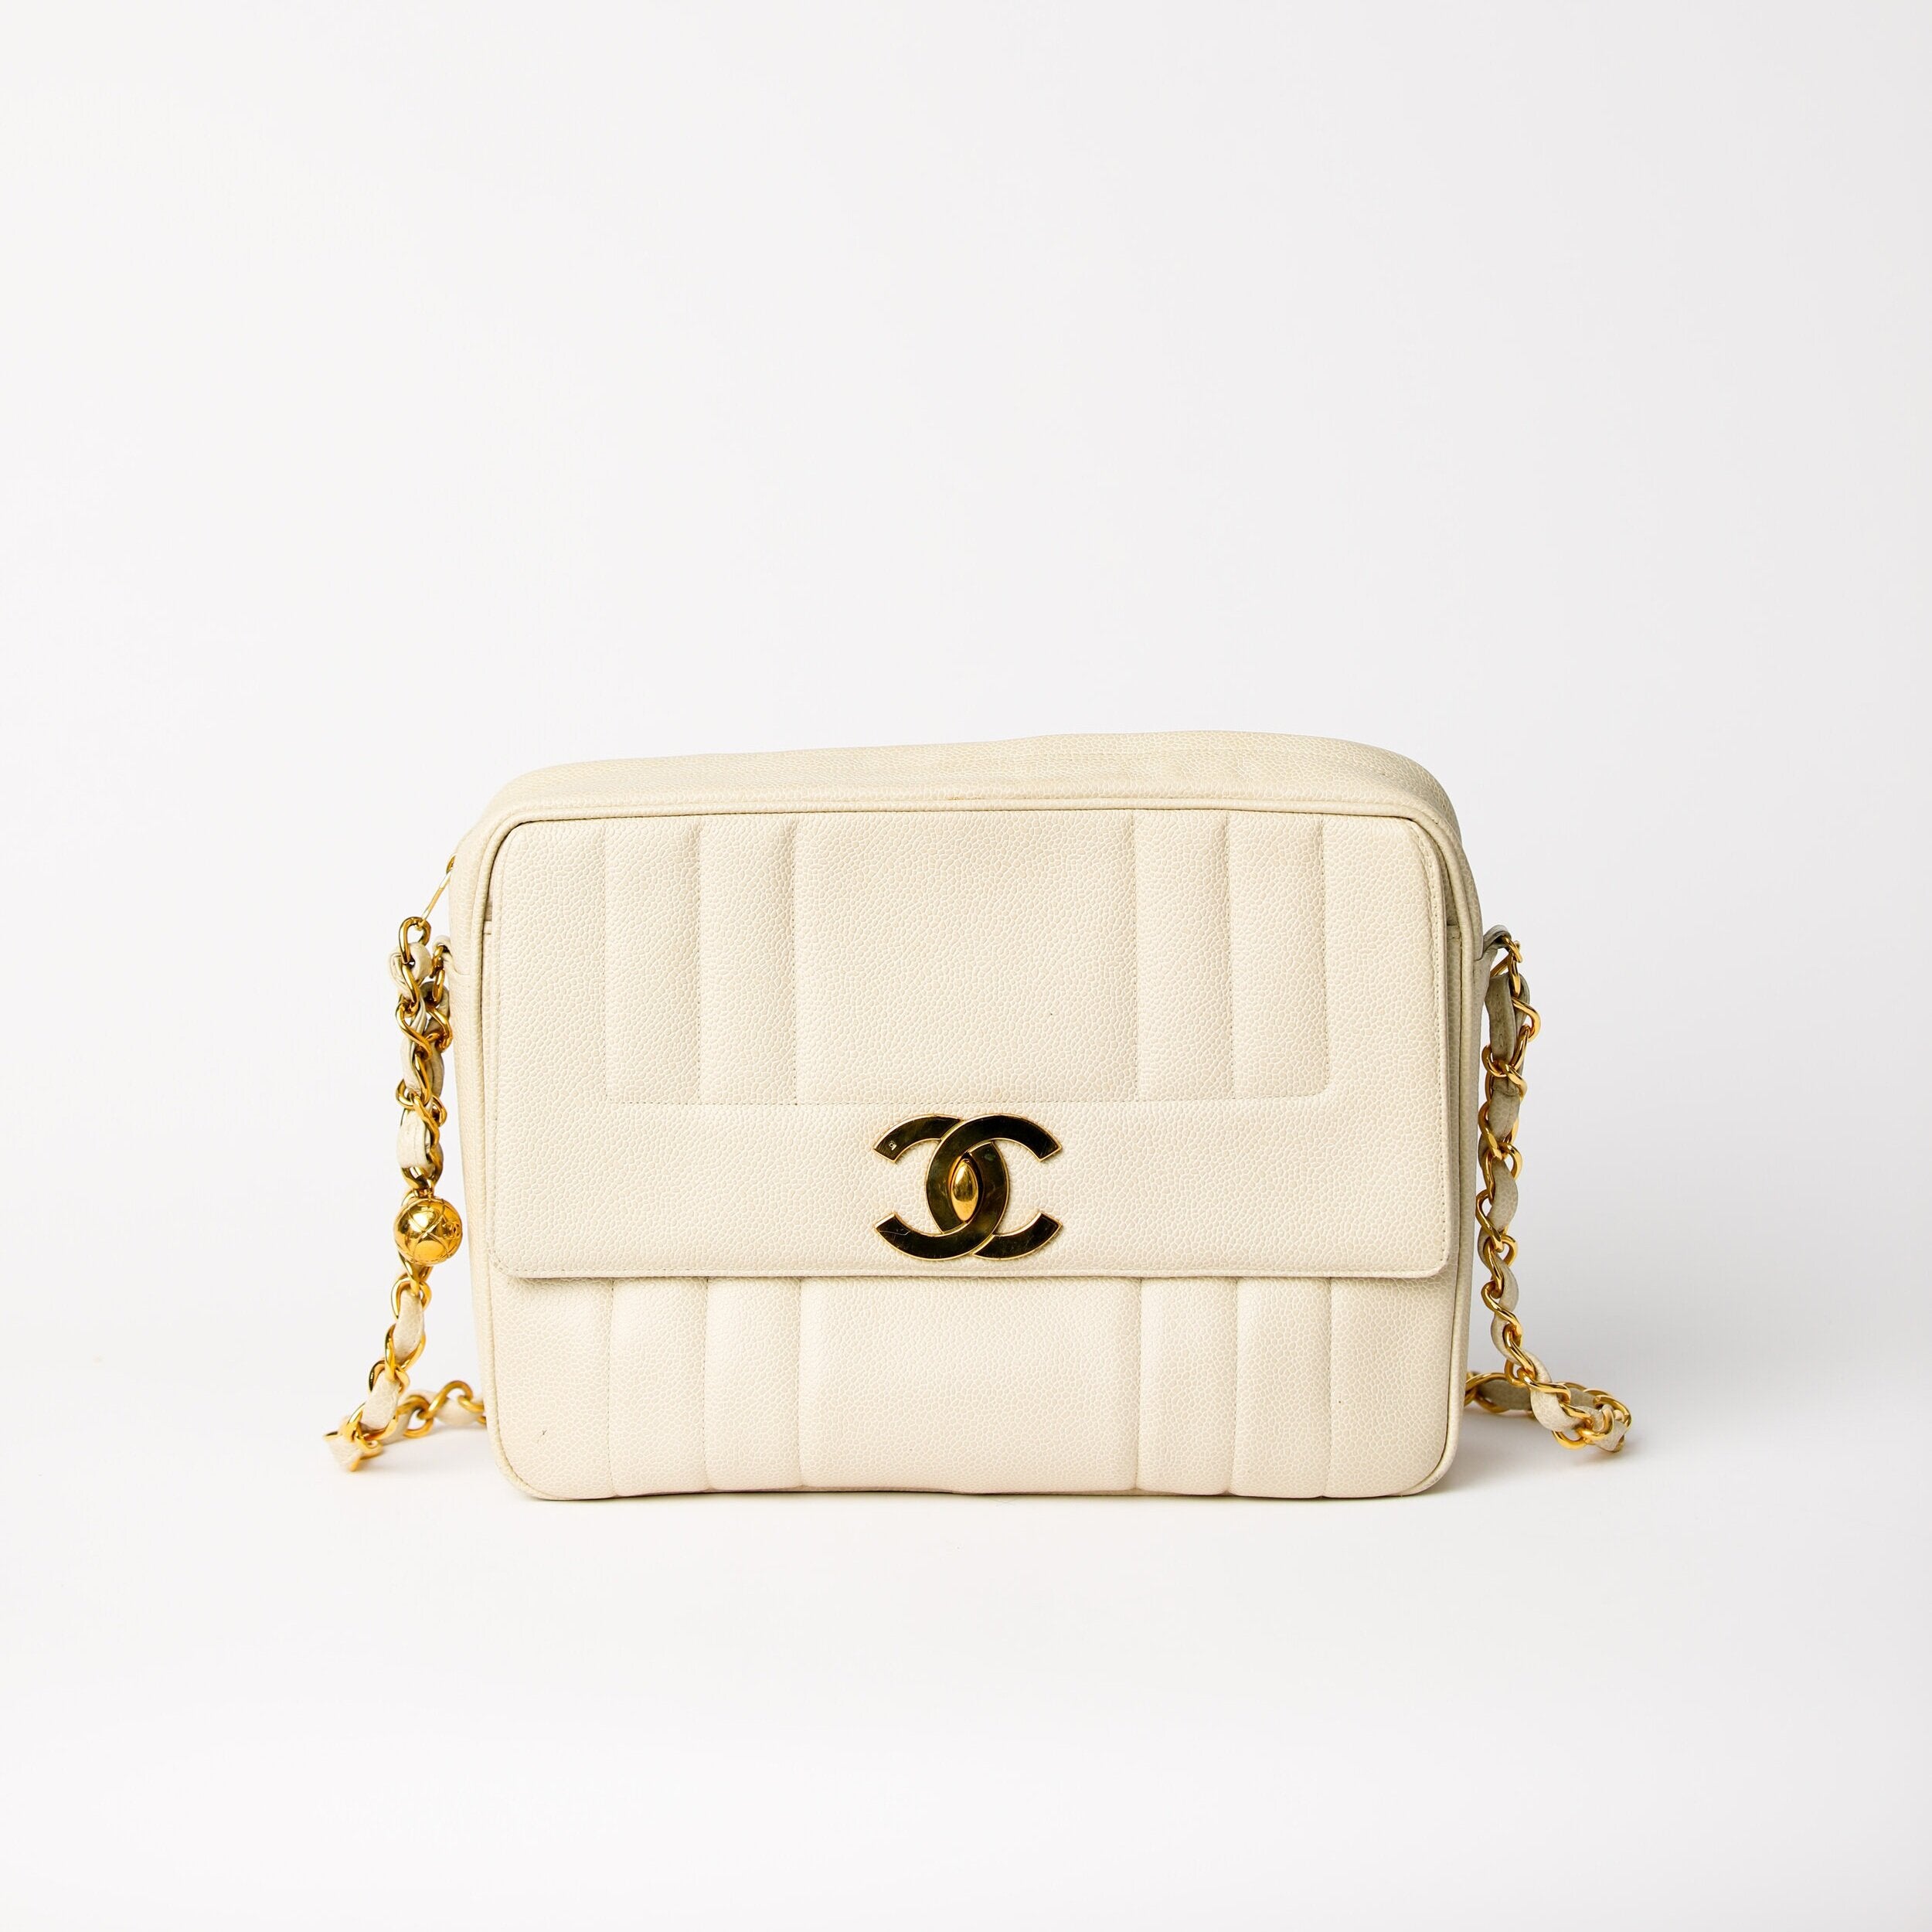 Chanel White Lambskin Double Sided Classic Flap Bag Vintage